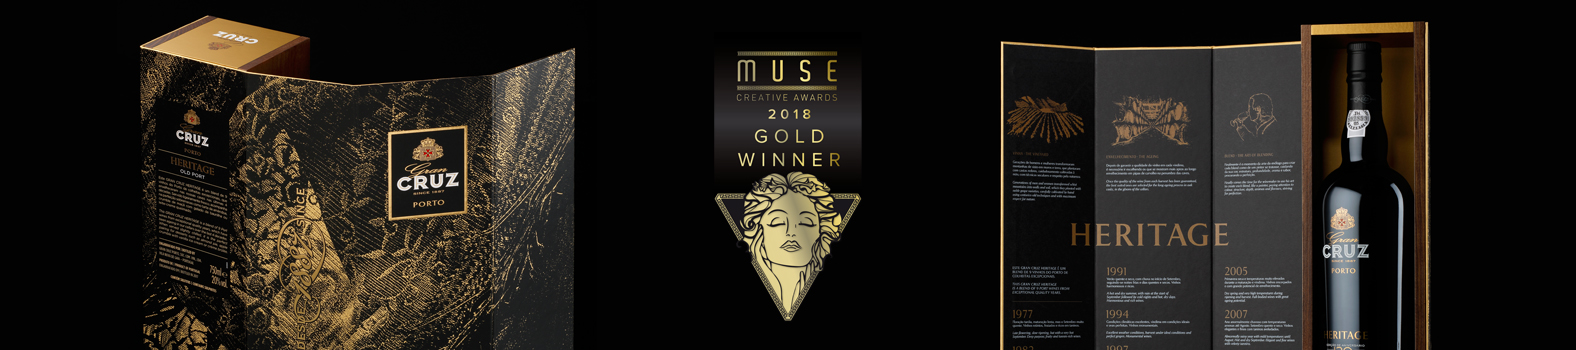 Omdesign scores again at Muse Creative Awards